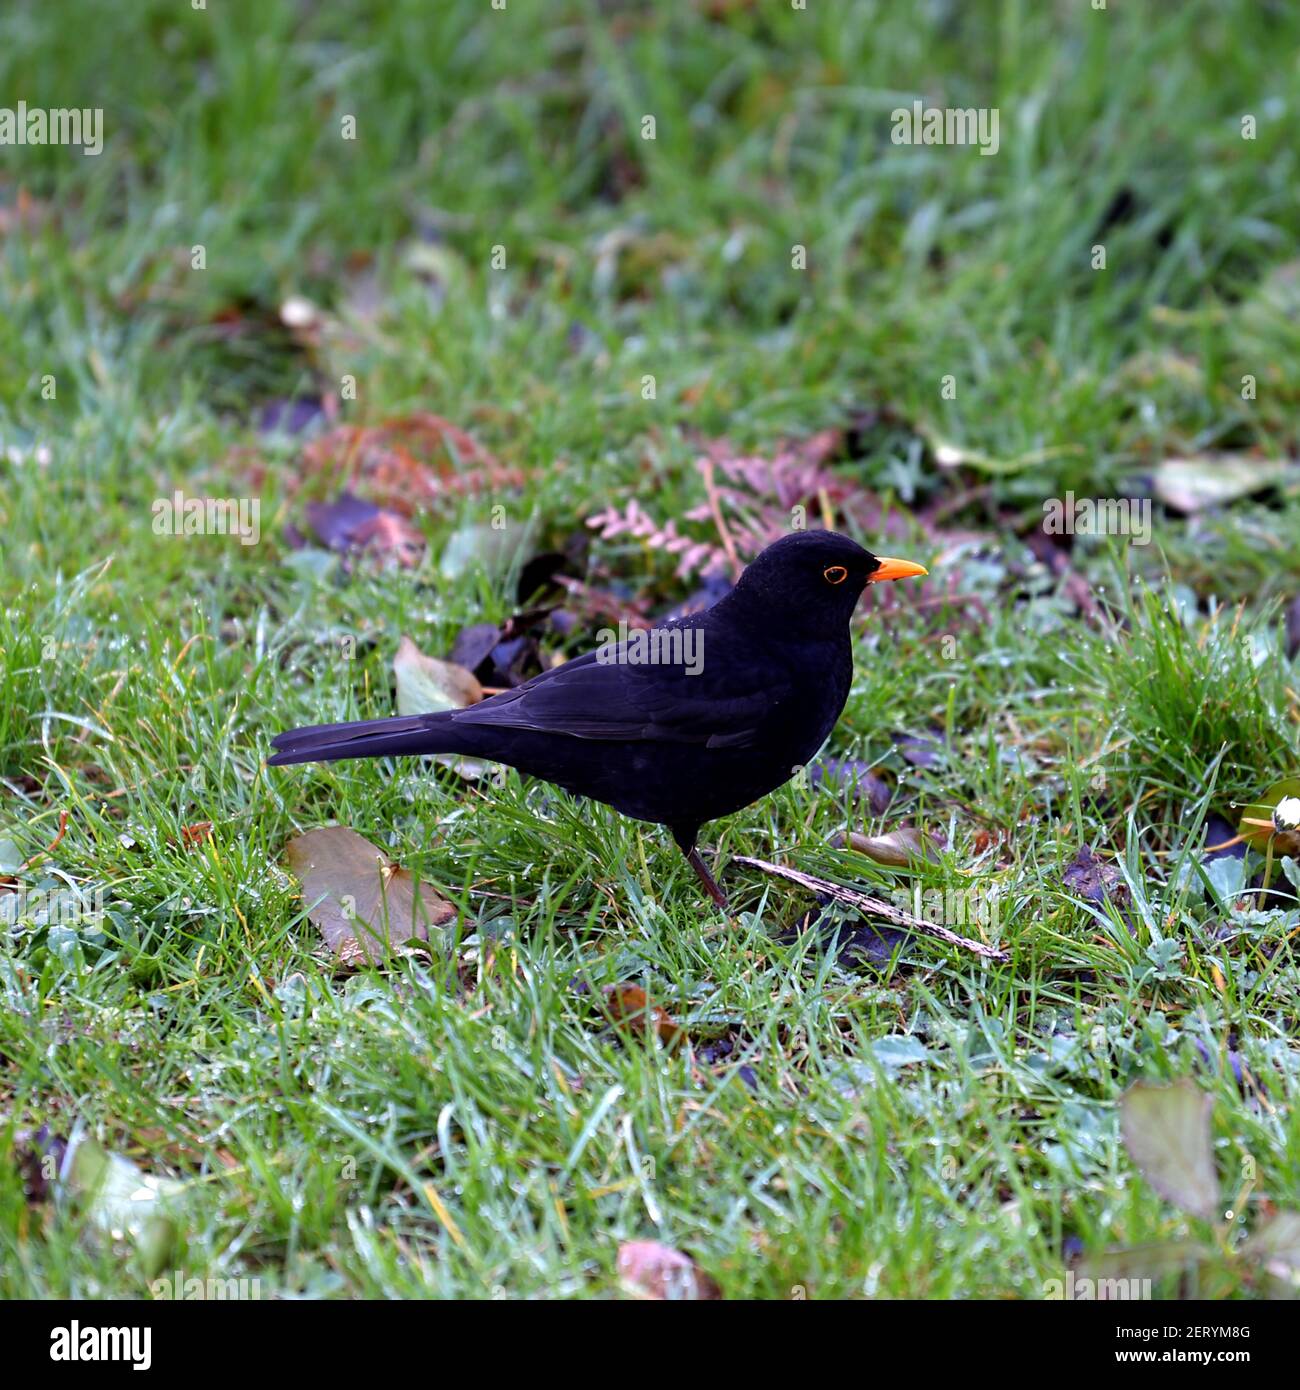 A Blackbird listens, looks and waits on a frosty morning. A garden lawn and fallen leaves are a good place for them to find food. Stock Photo